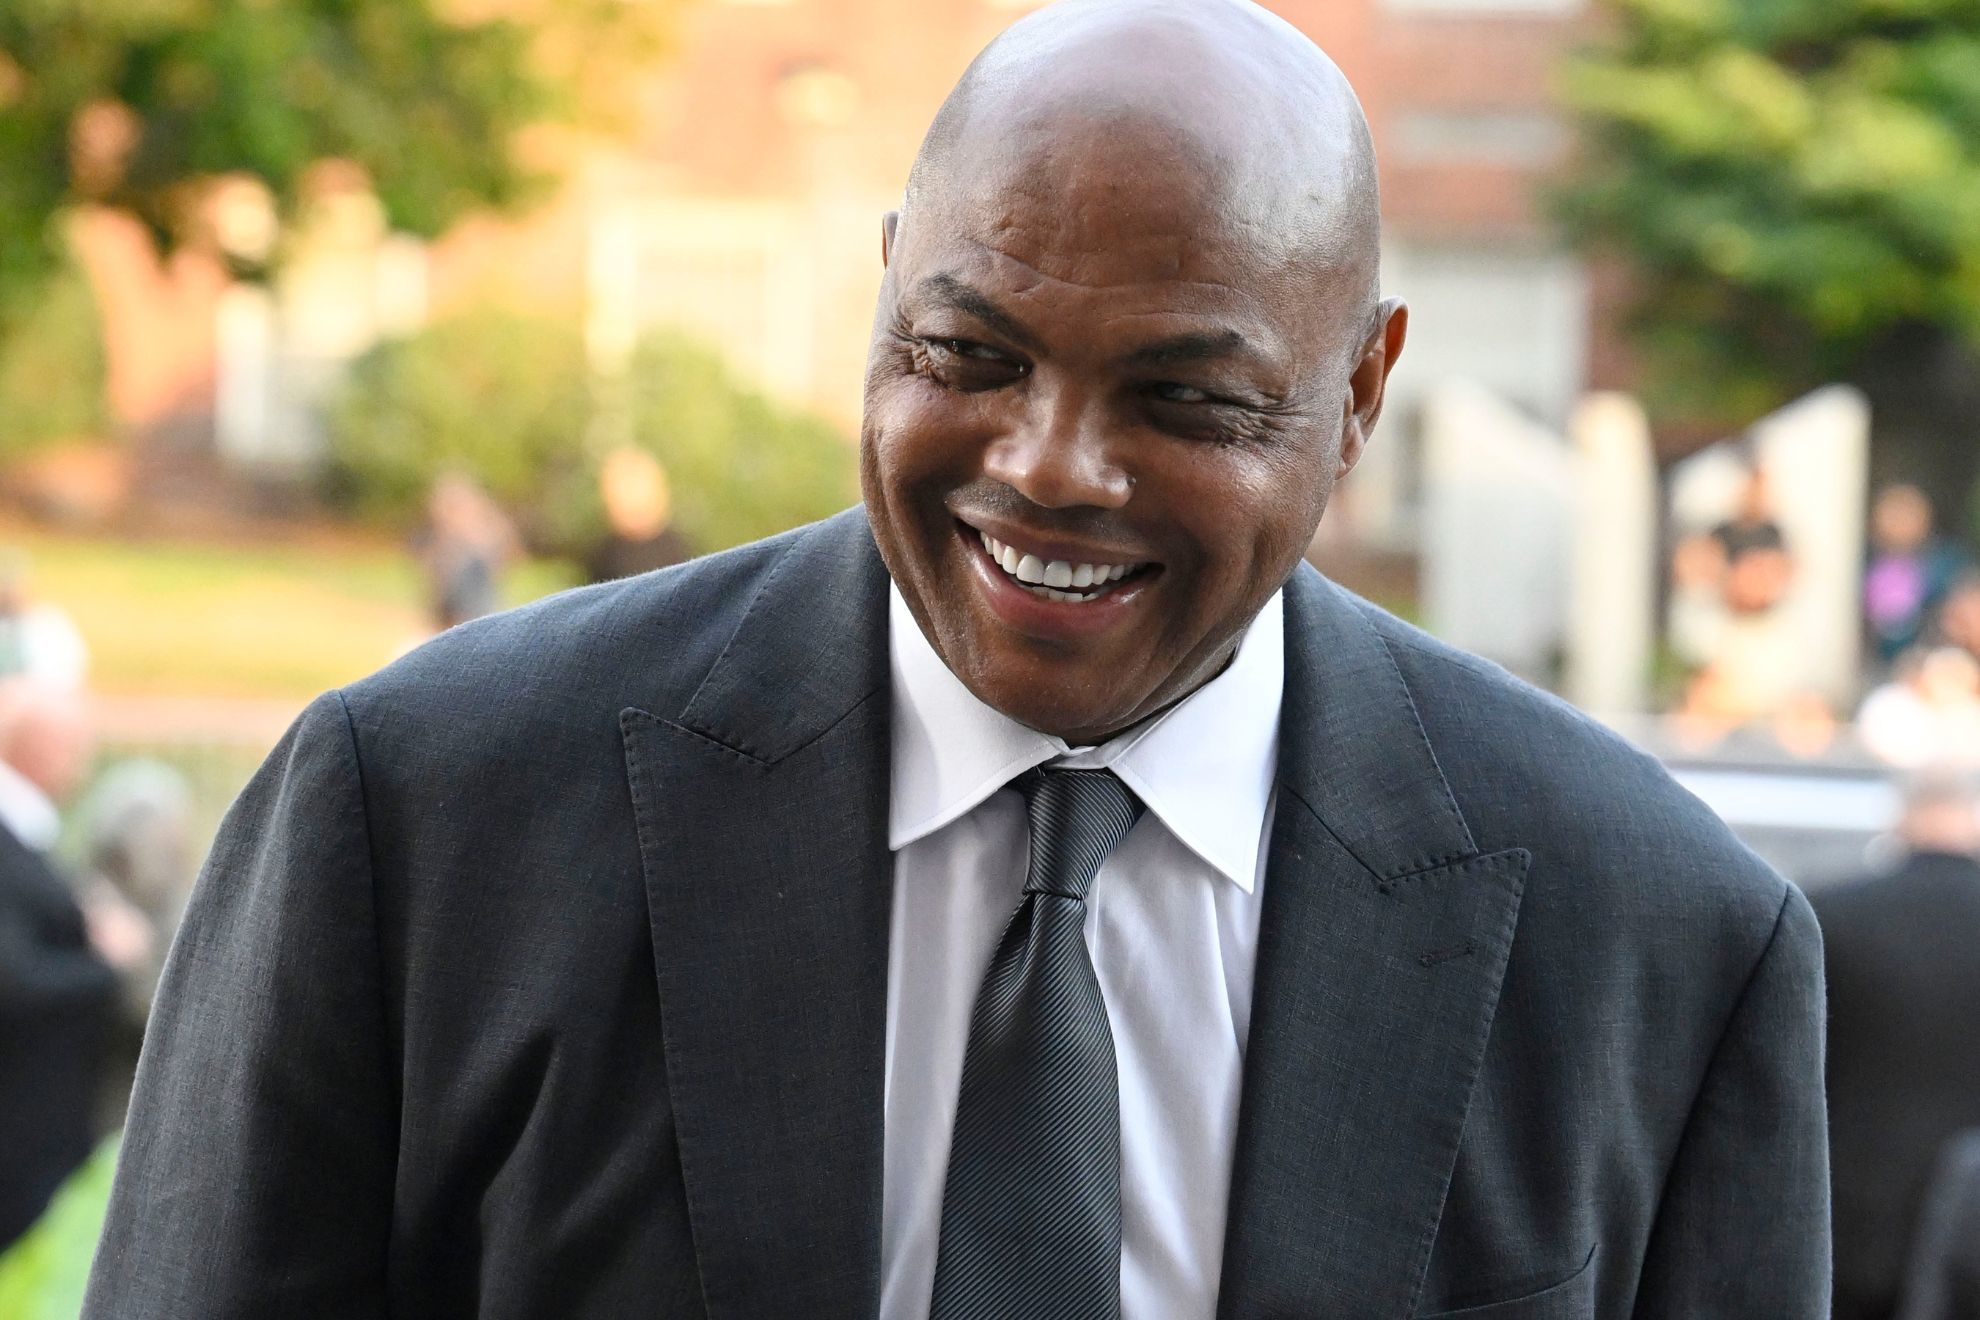 Charles Barkley worries about the NBAs future: Everybody has to be concerned